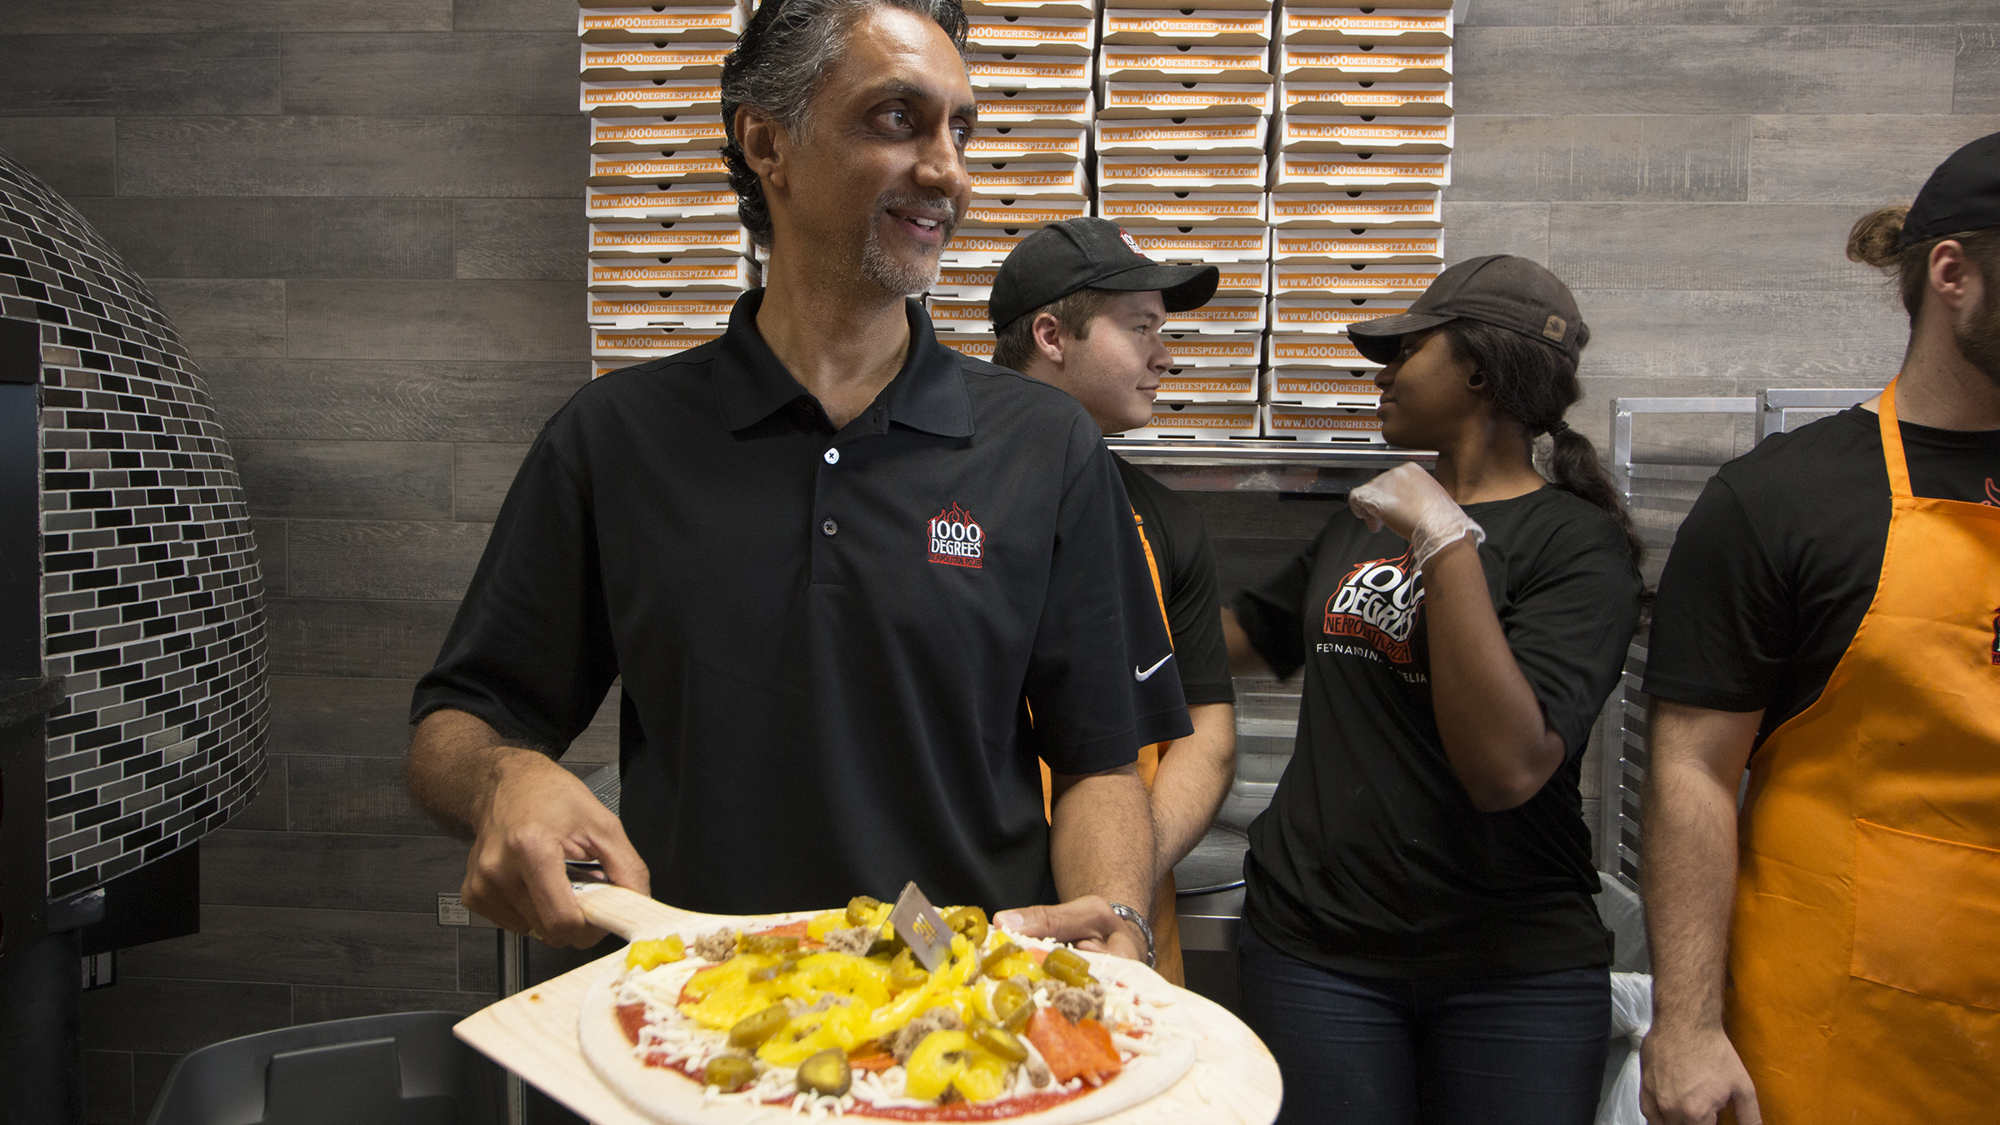 Prakash Patel at his 1000 Degrees Pizza restaurant in Fernandina Beach. He and his brother, Anil Patel, intend to open a Baymeadows location and expect their Gainesville restaurant to launch in a few weeks.